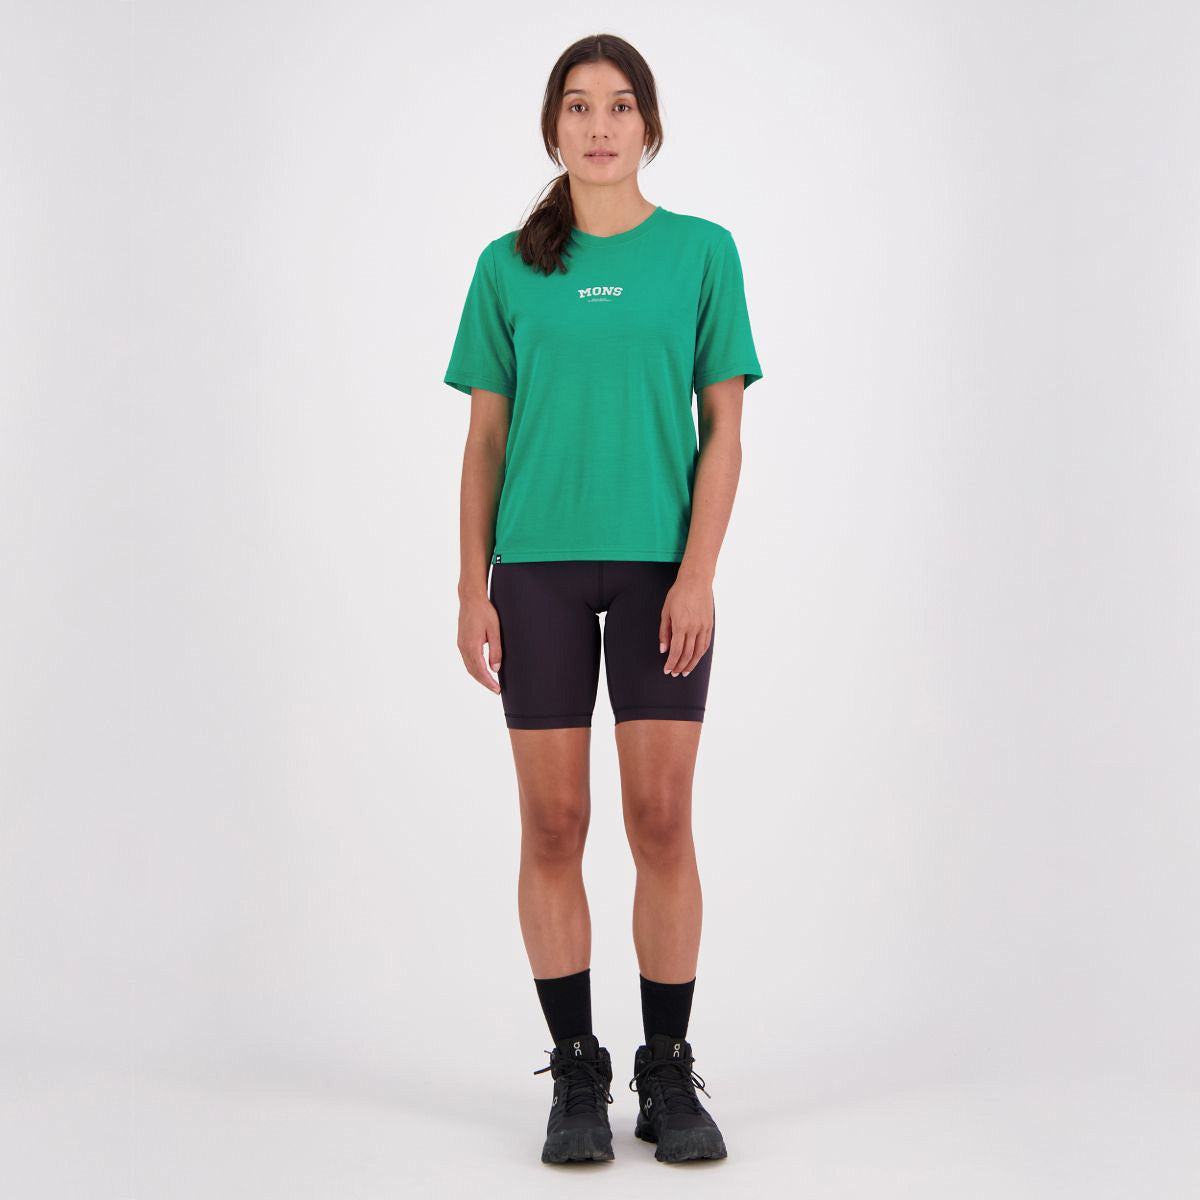 Mons Royale (Sample) - Women's Icon Relaxed Tee - Pop Green